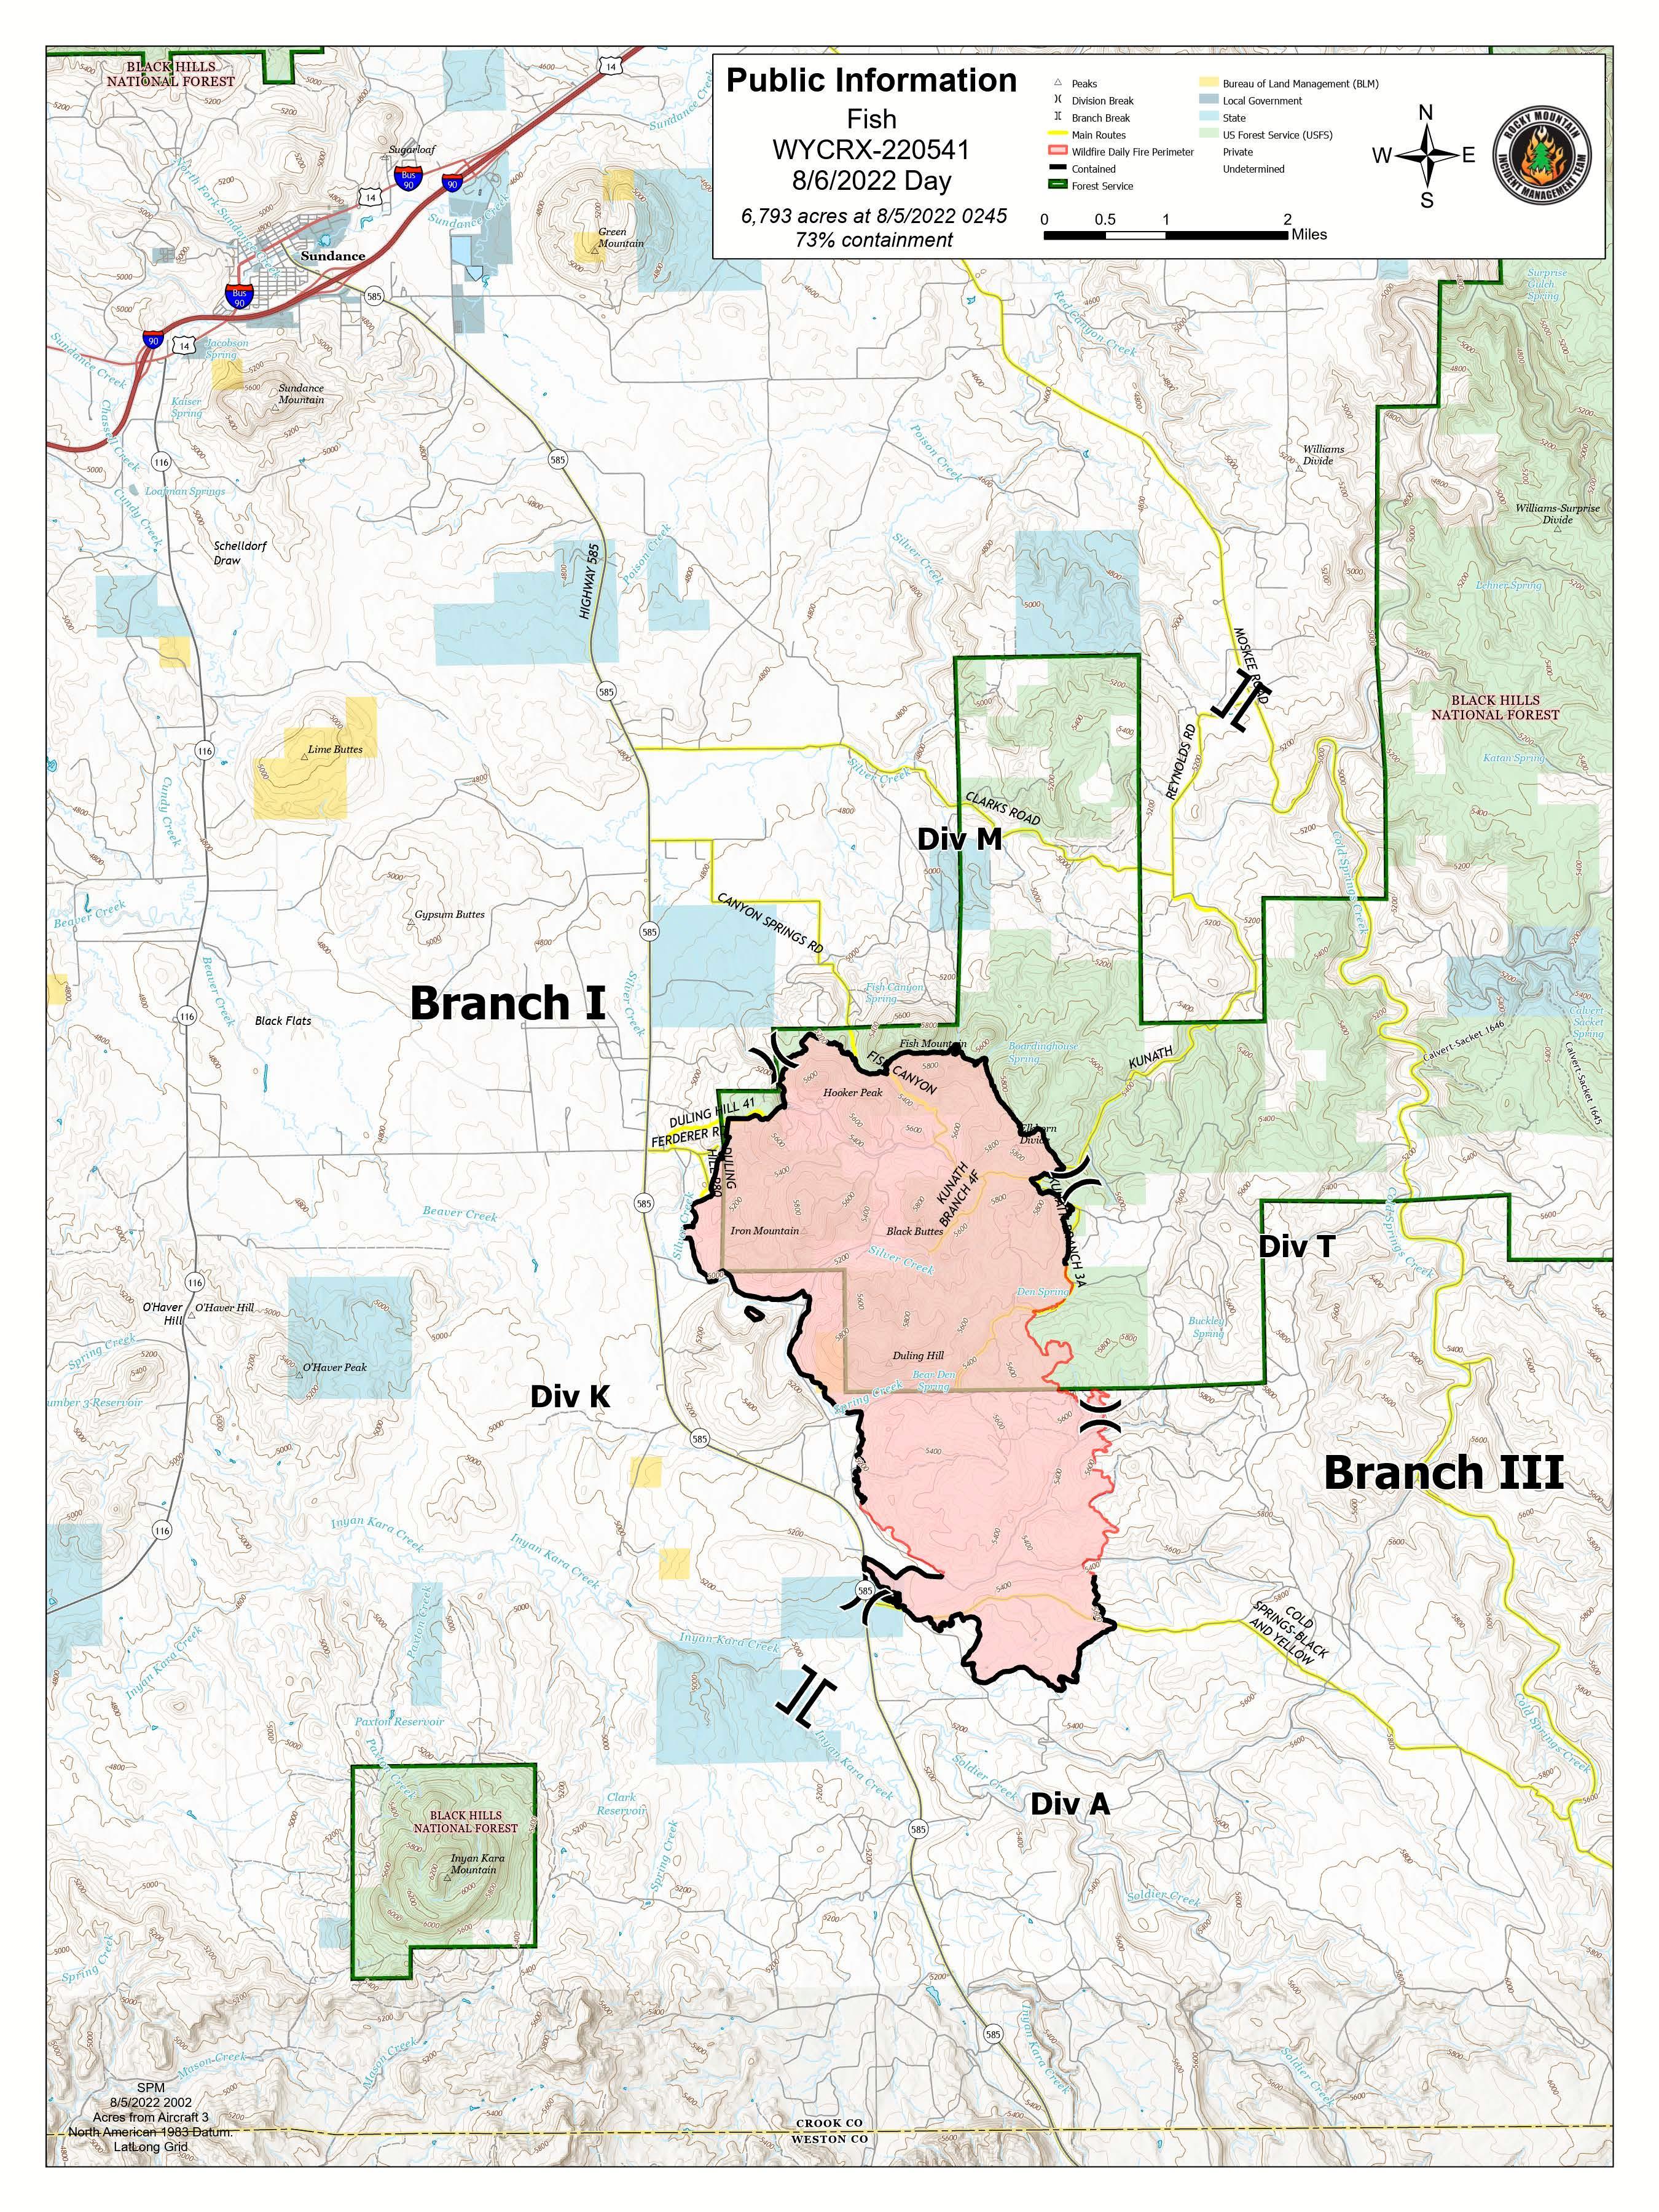 Fish Fire map, Saturday, Aug 6